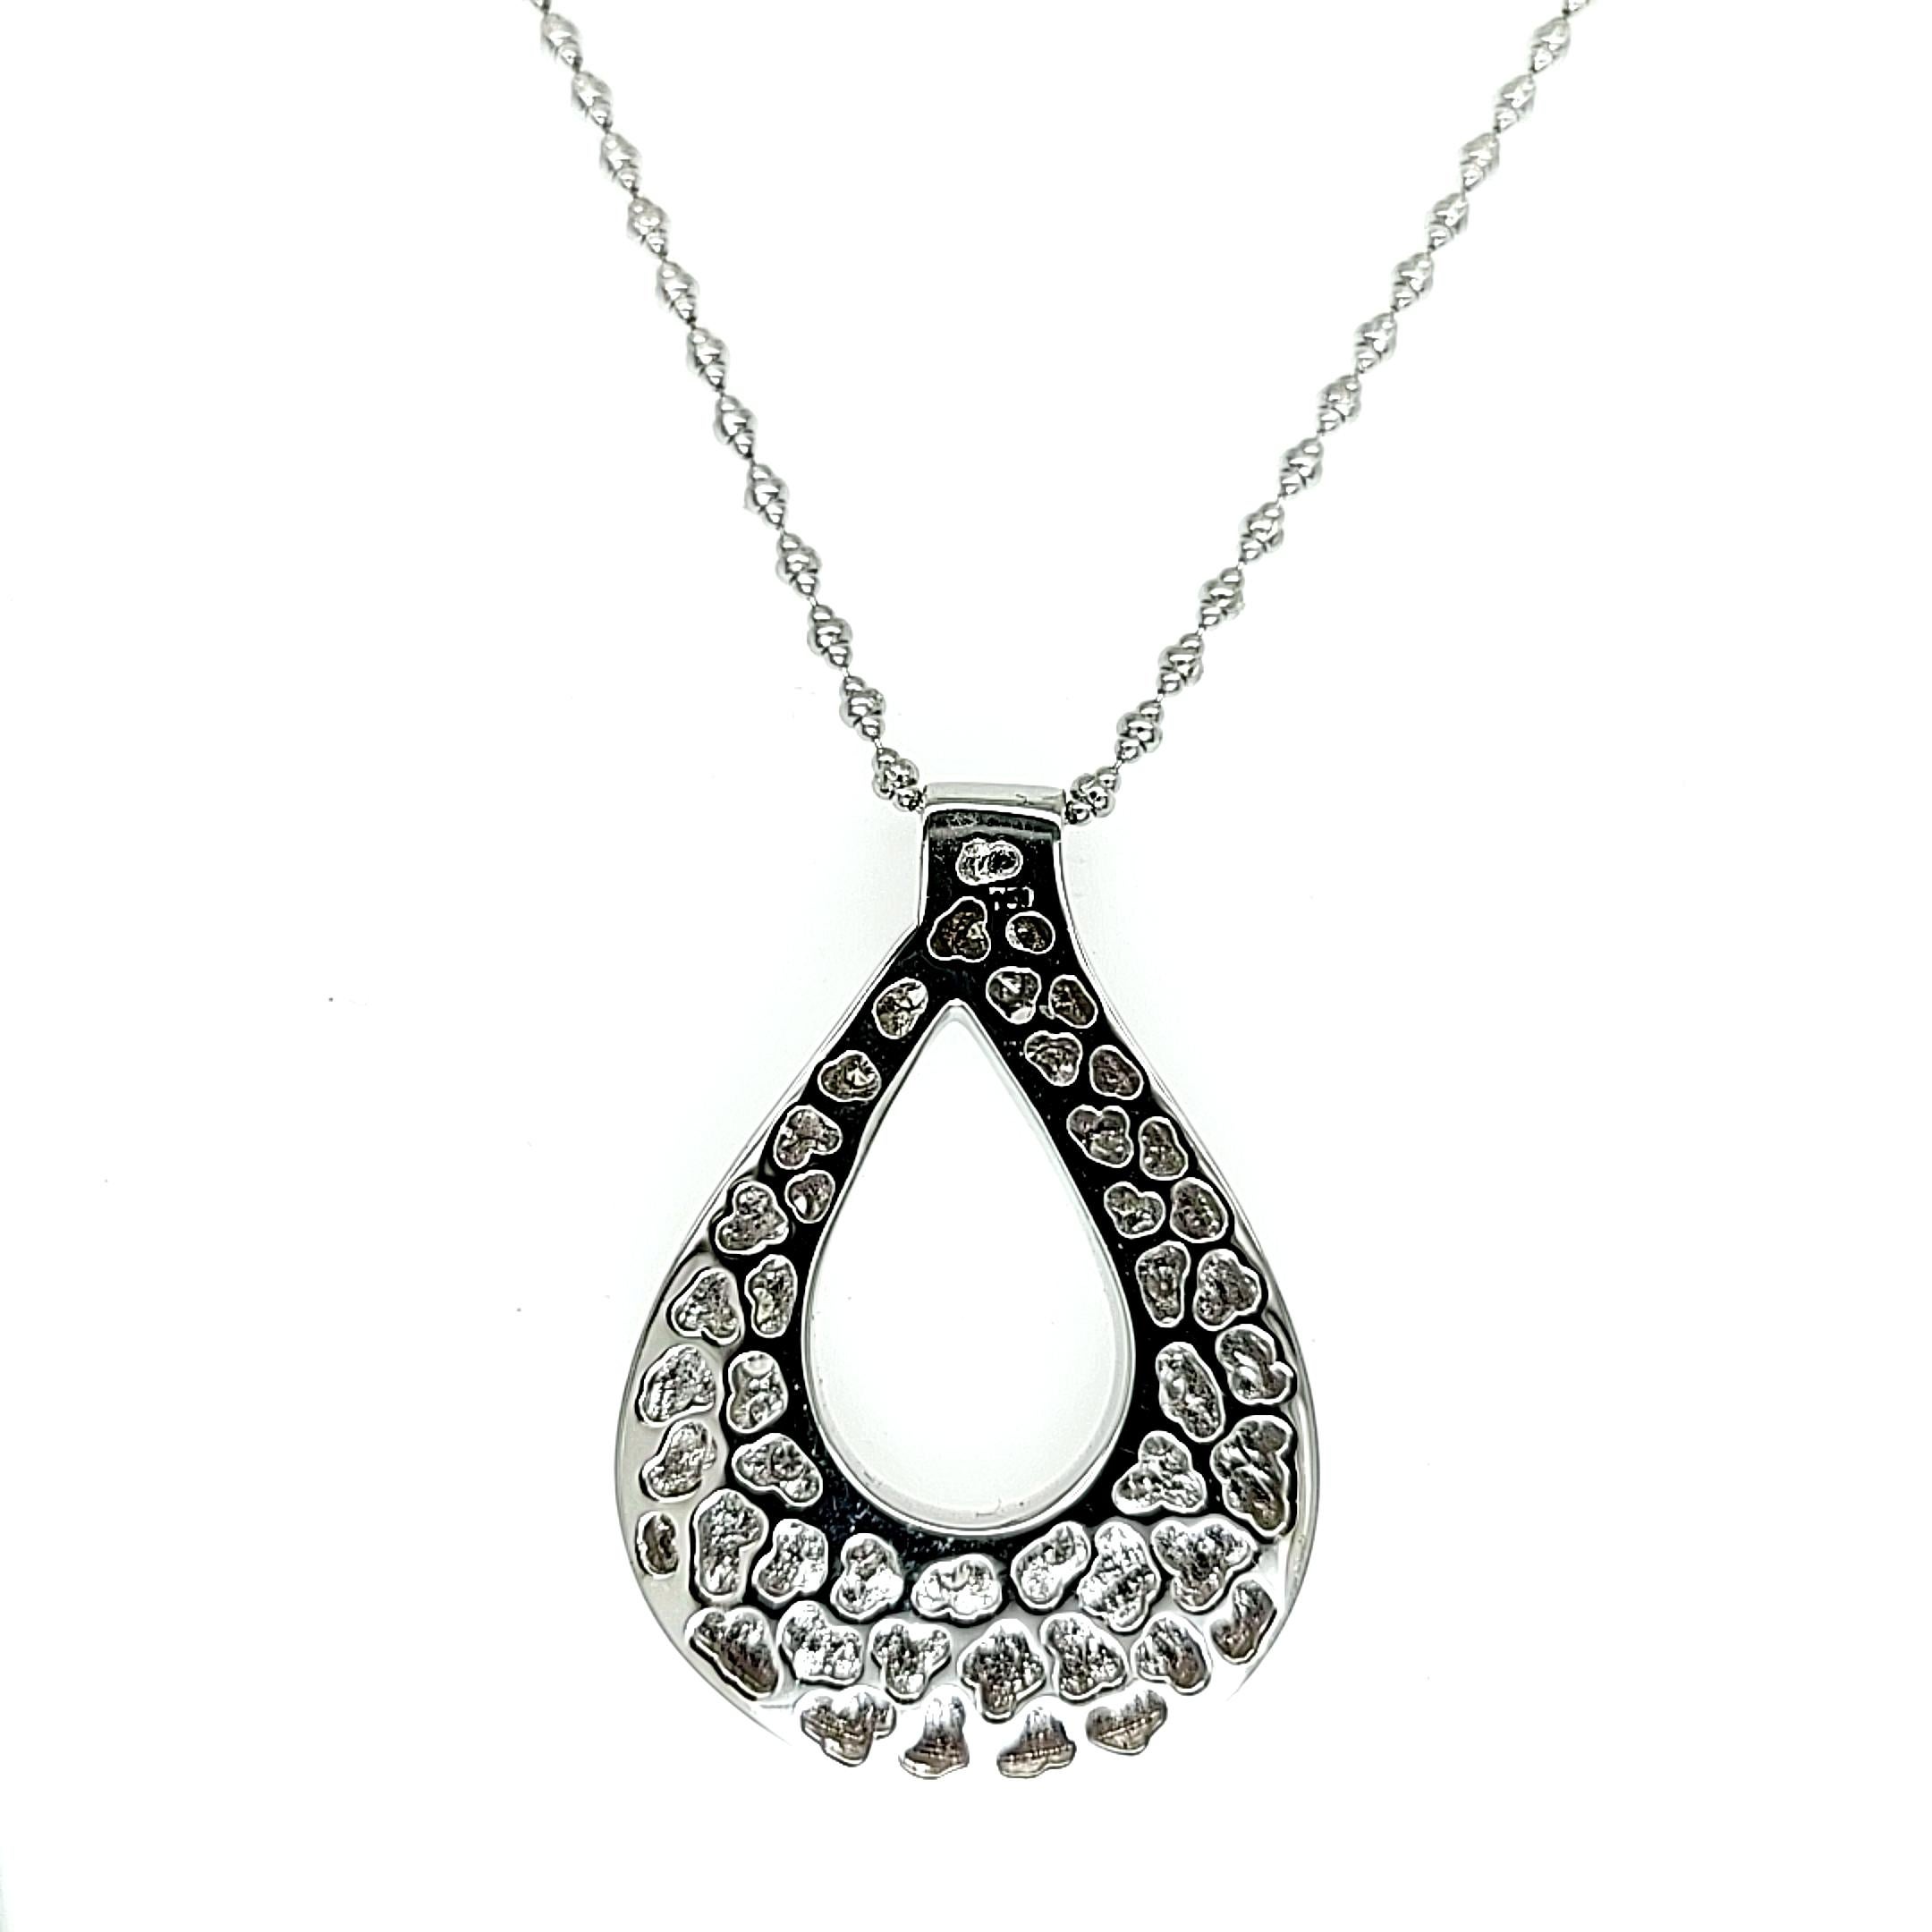 18 Karat White Gold Pear Shaped Pendant Necklace with Diamonds For Sale 3